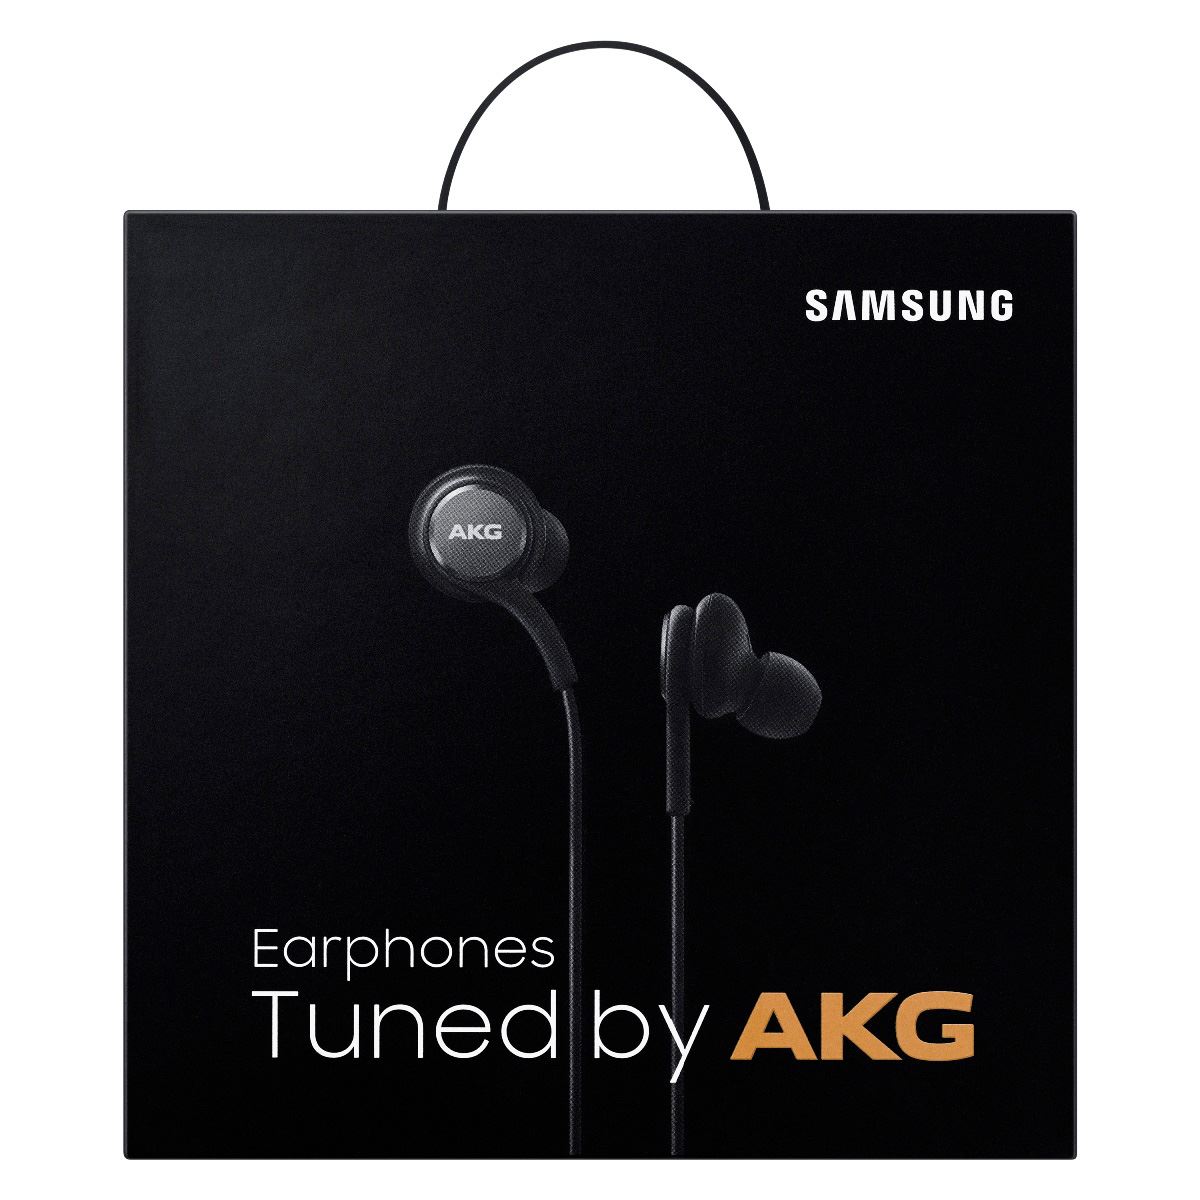 GENERICO Audífonos In ear Samsung Tuned By Akg Negros